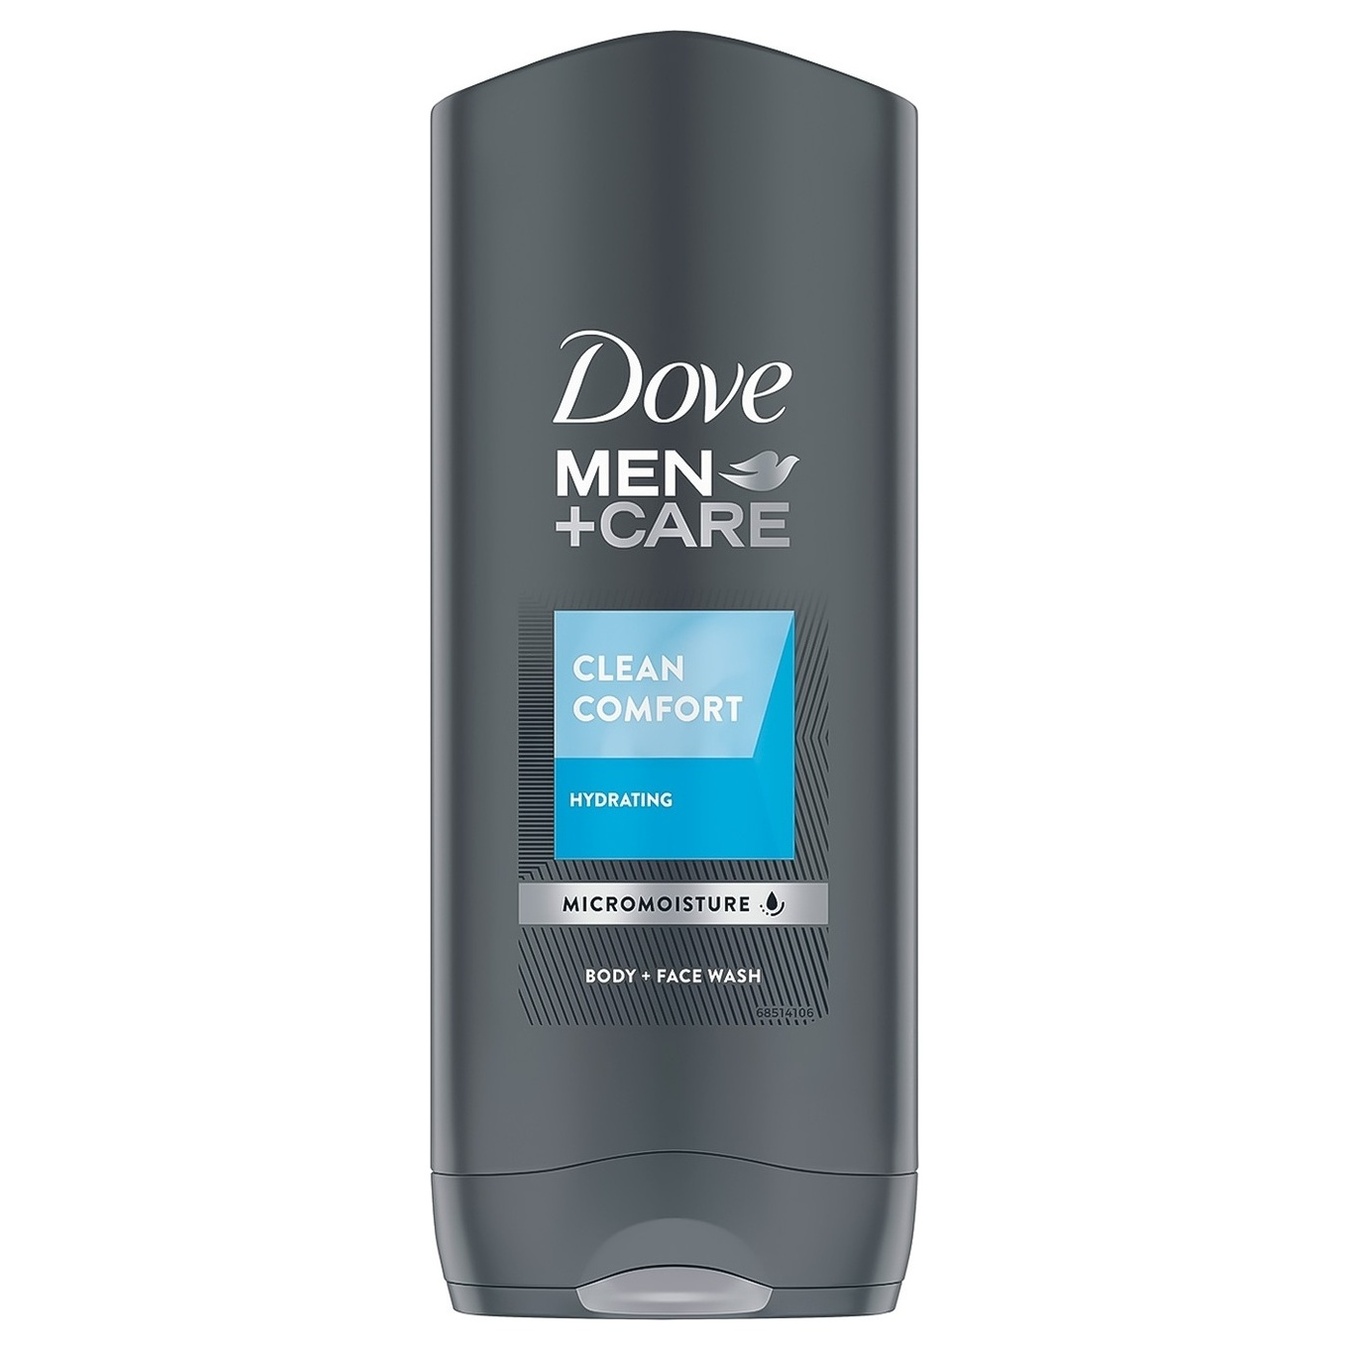 Dove shower gel cleanliness and comfort 400 ml